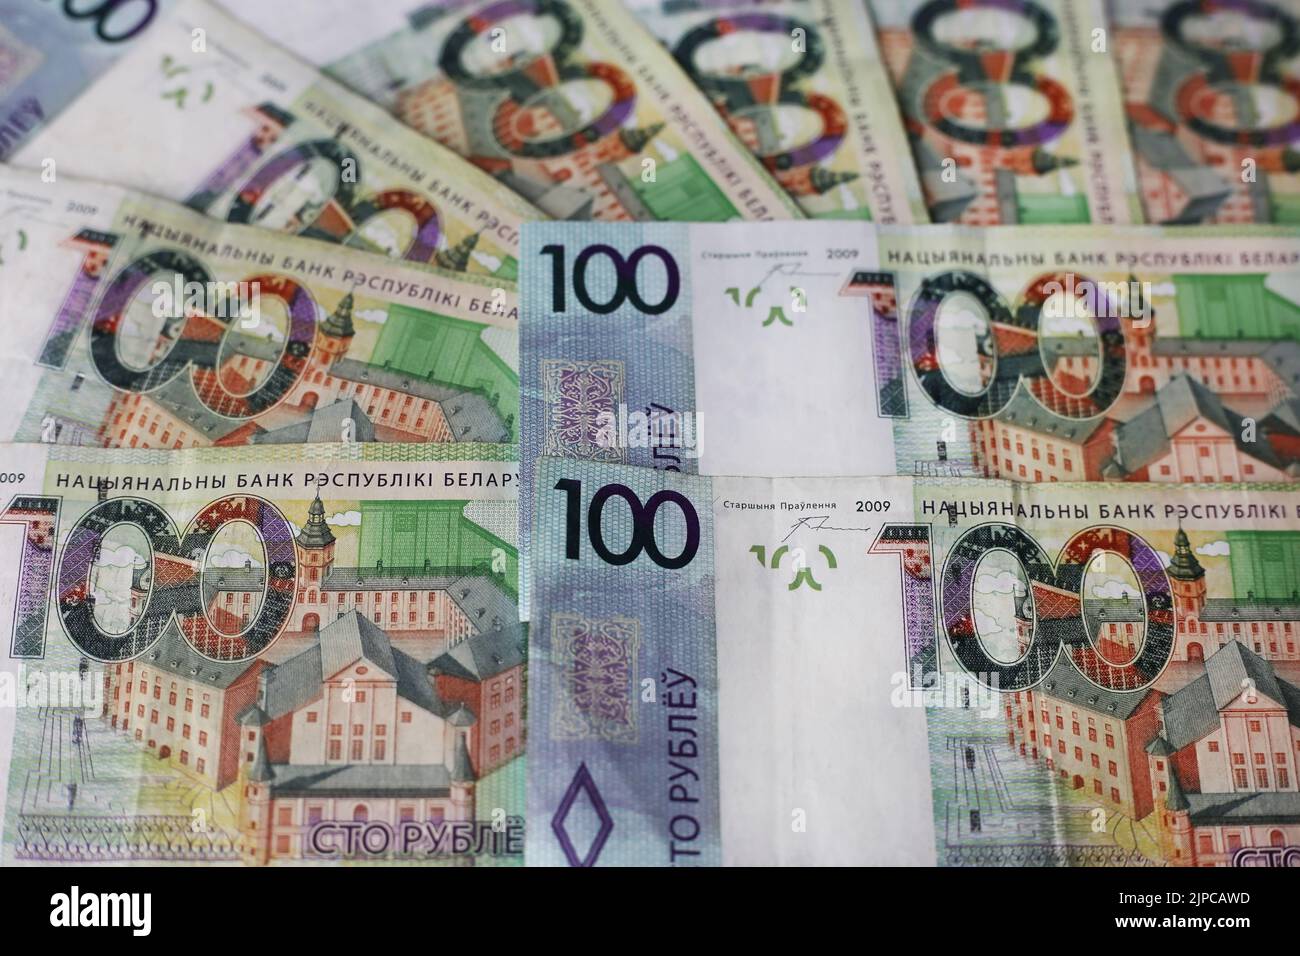 Banknotes of 100 Belarusian rubles laid out, close-up Stock Photo